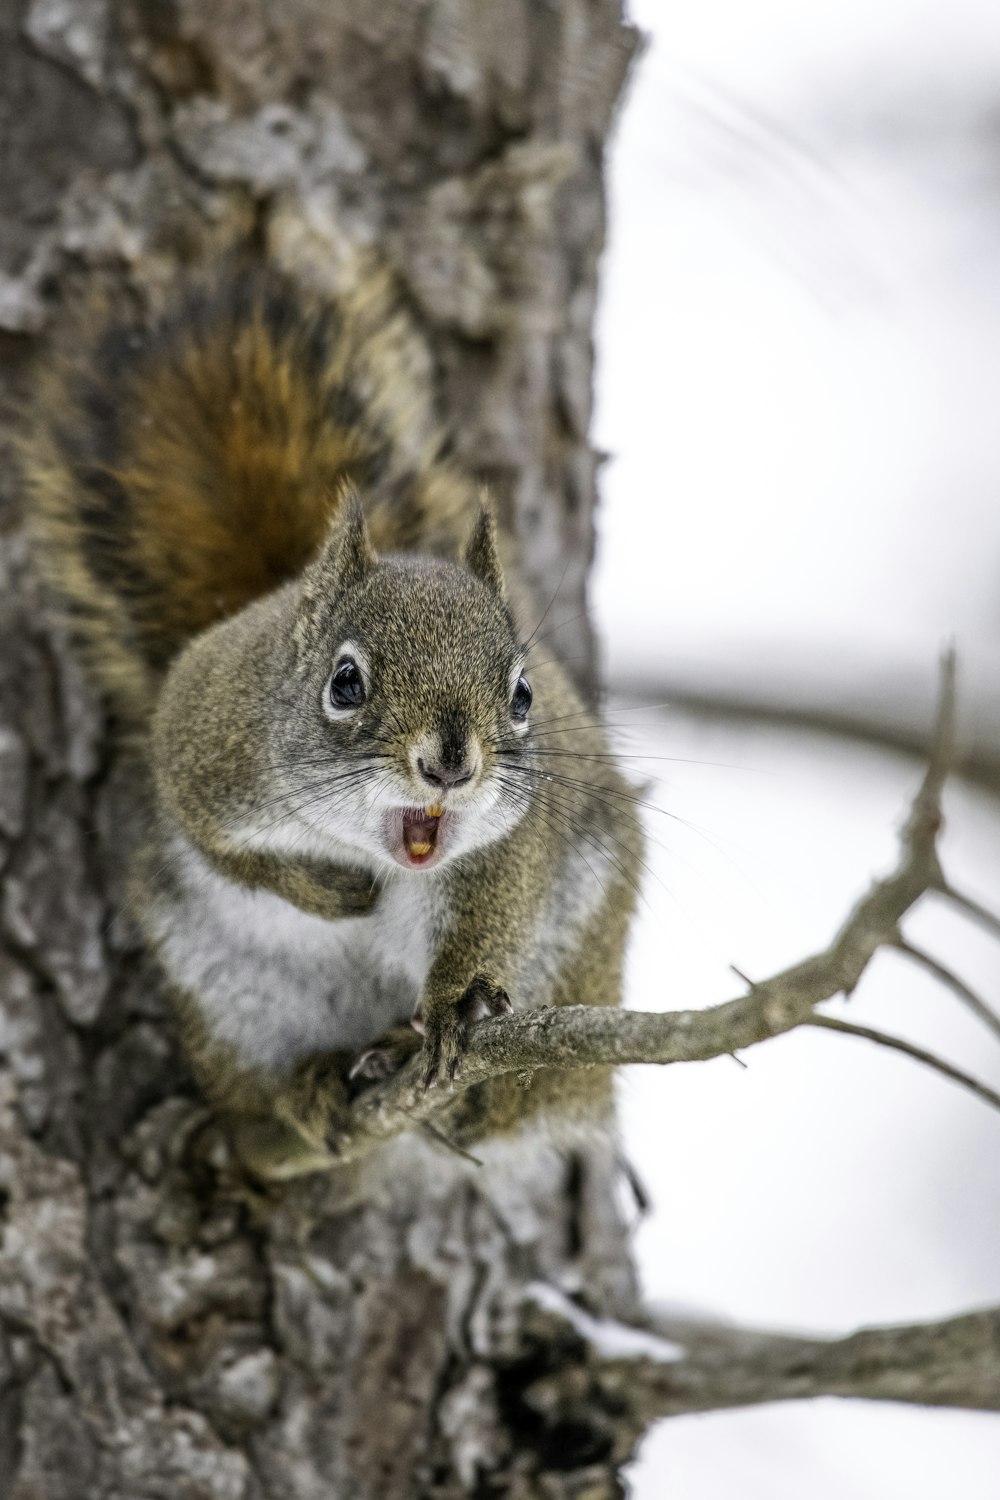 a squirrel sitting on a tree branch with its mouth open